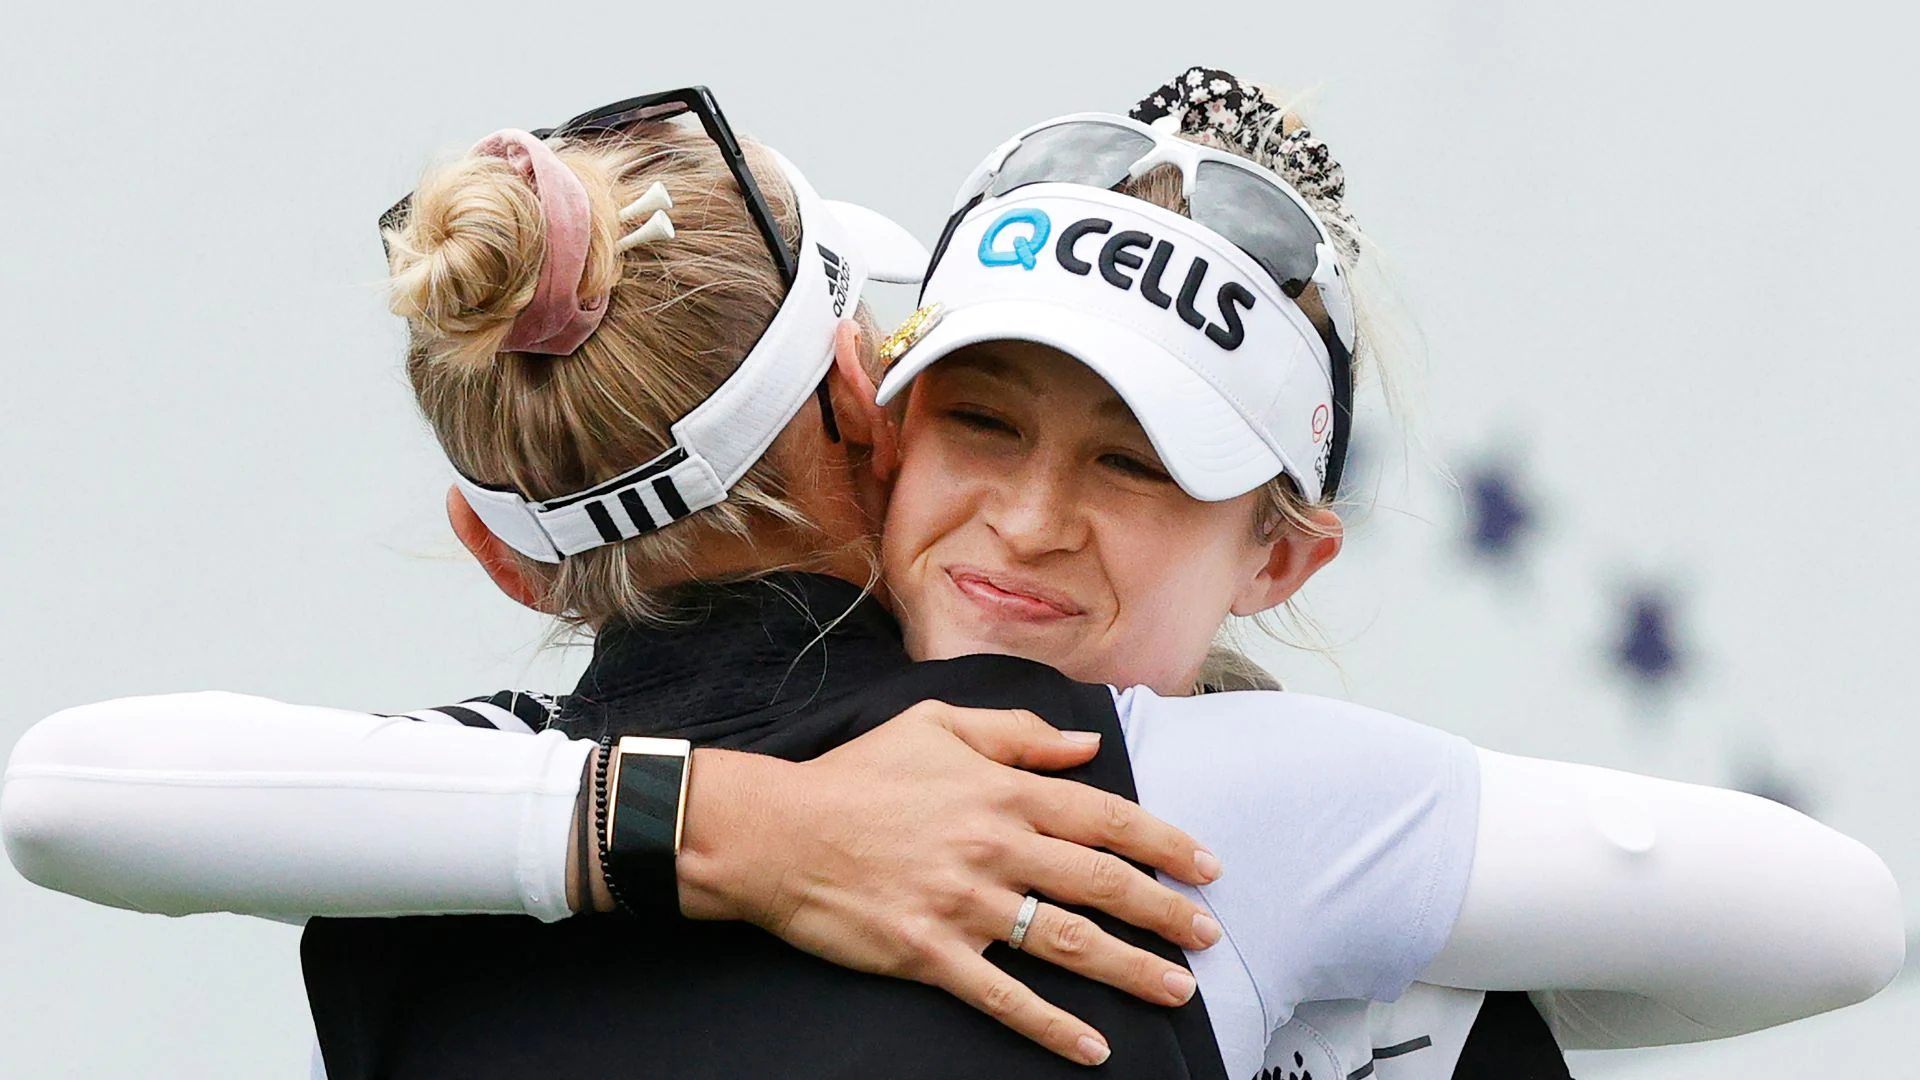 Nelly Korda makes up seven shots on sister Jessica to notch her first win of 2022